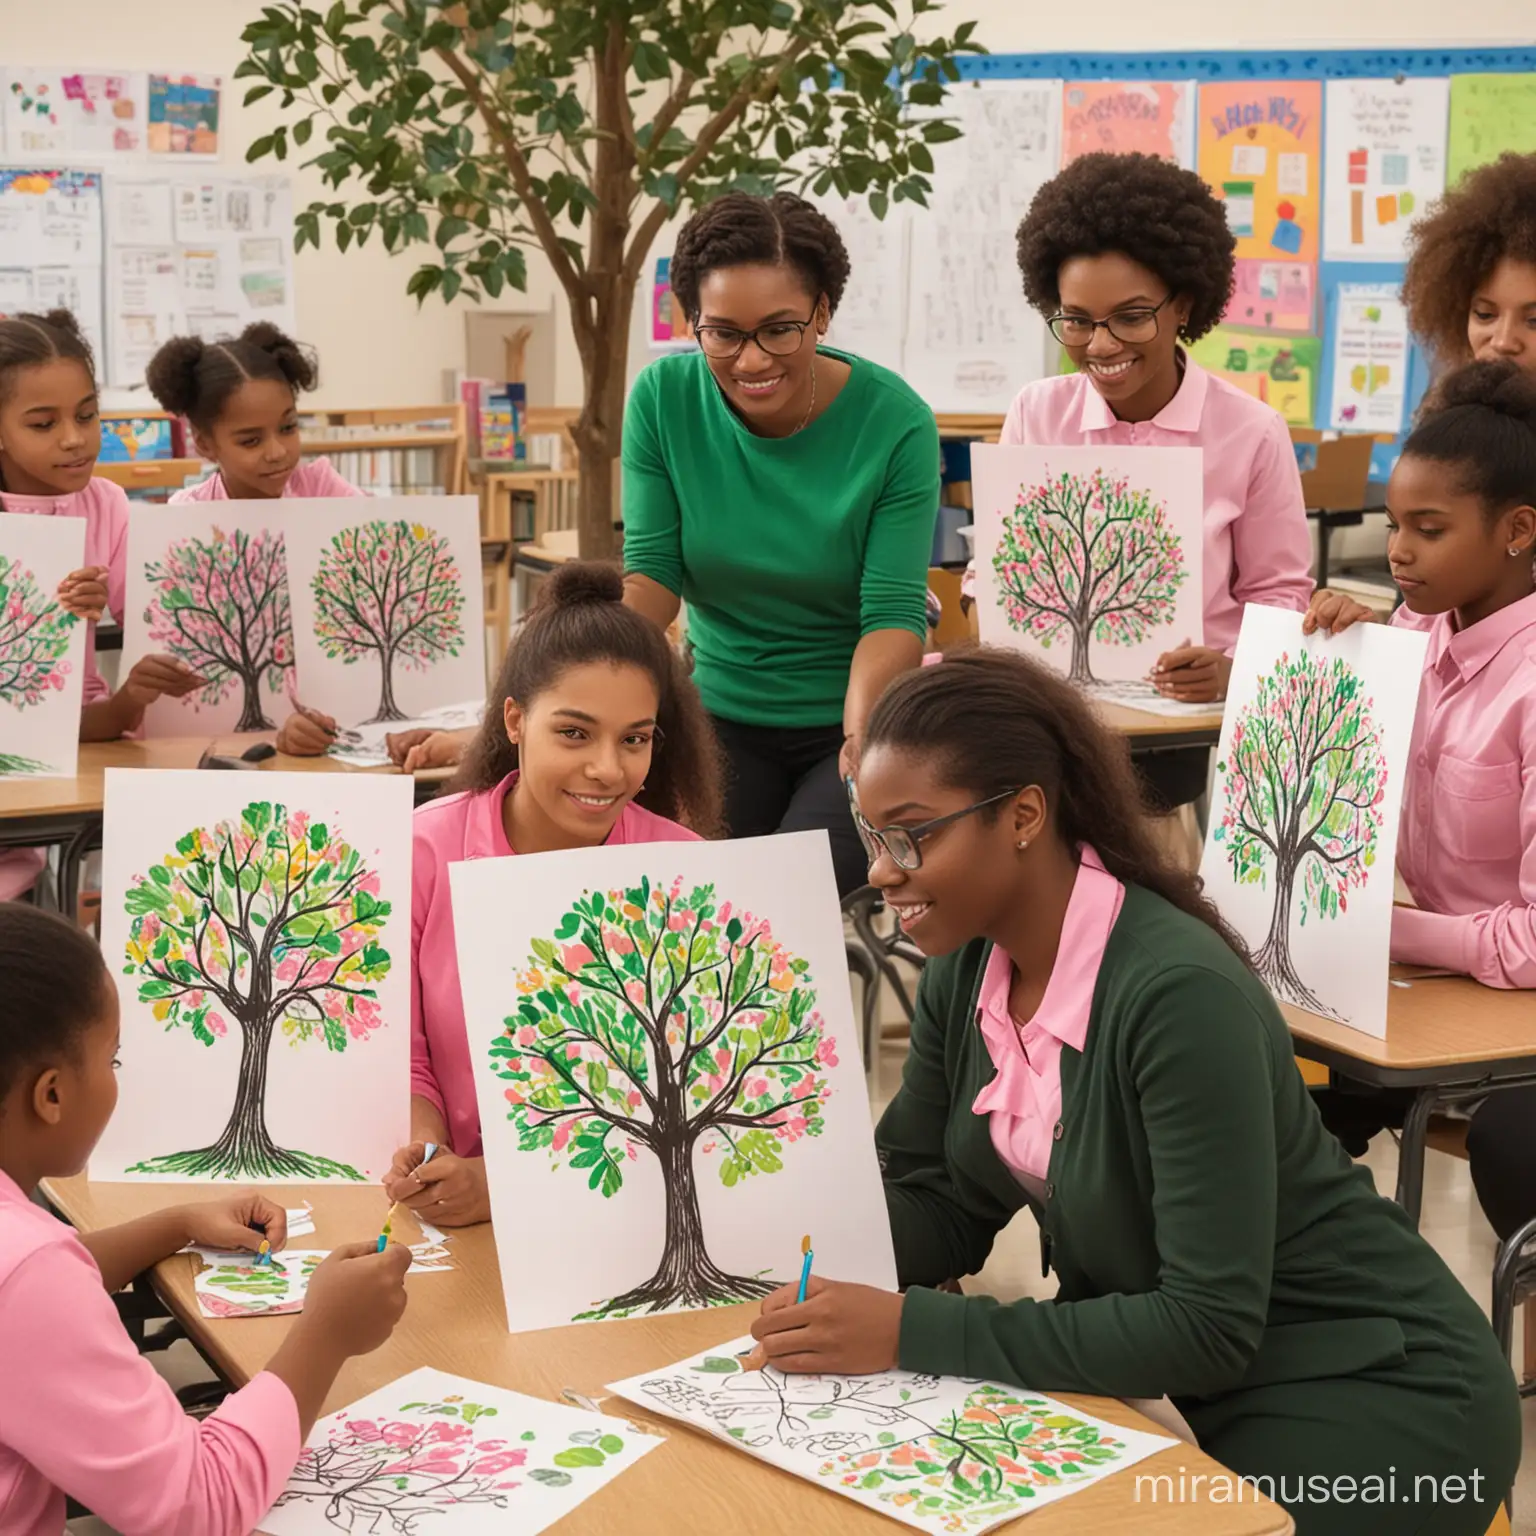 Black Women and Students Creating Tree Art in Vibrant School Atmosphere